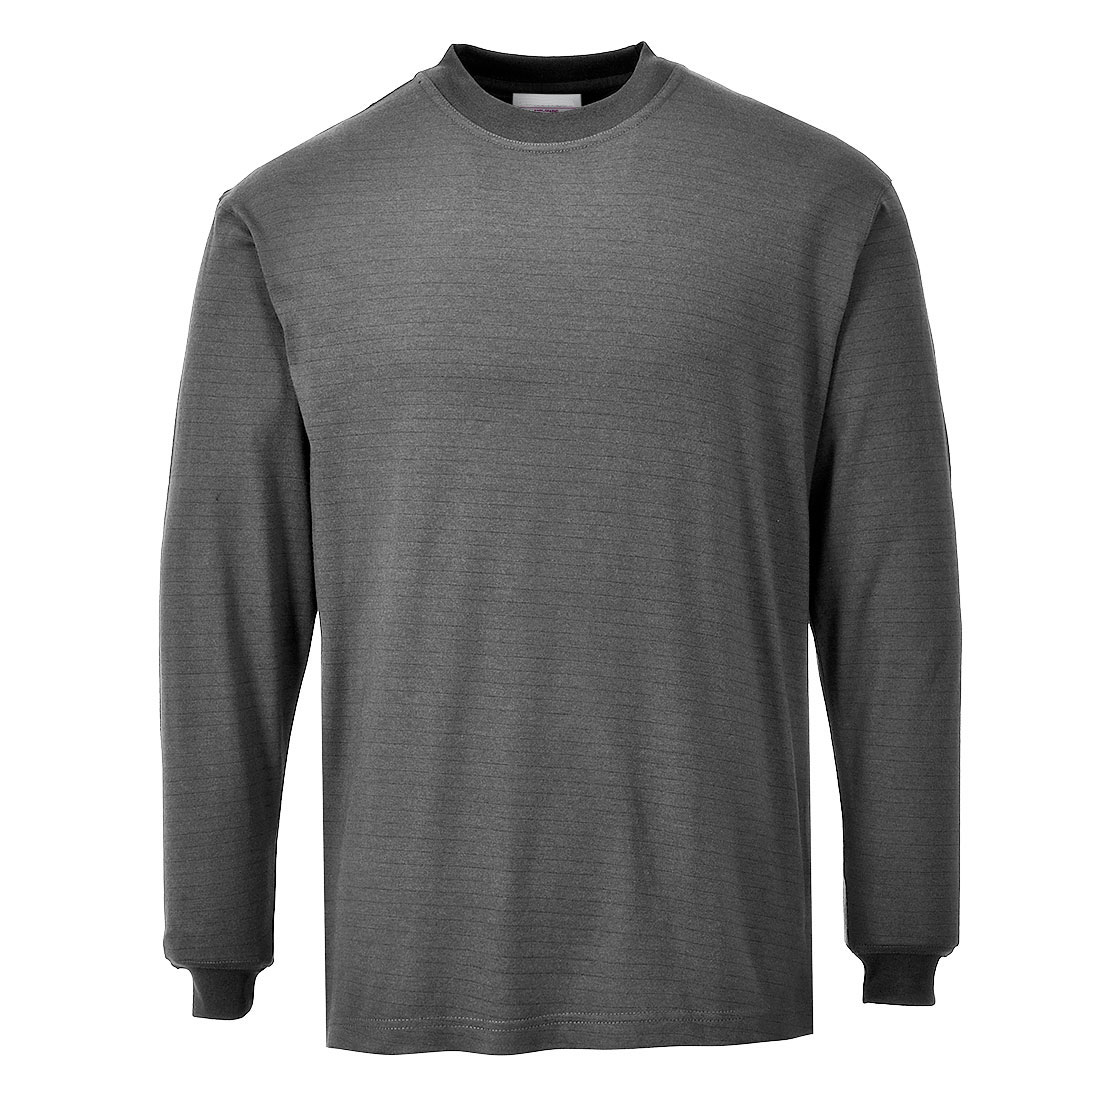 Flame Resistant Anti-Static Comfrtable Soft Long Sleeve T-Shirt